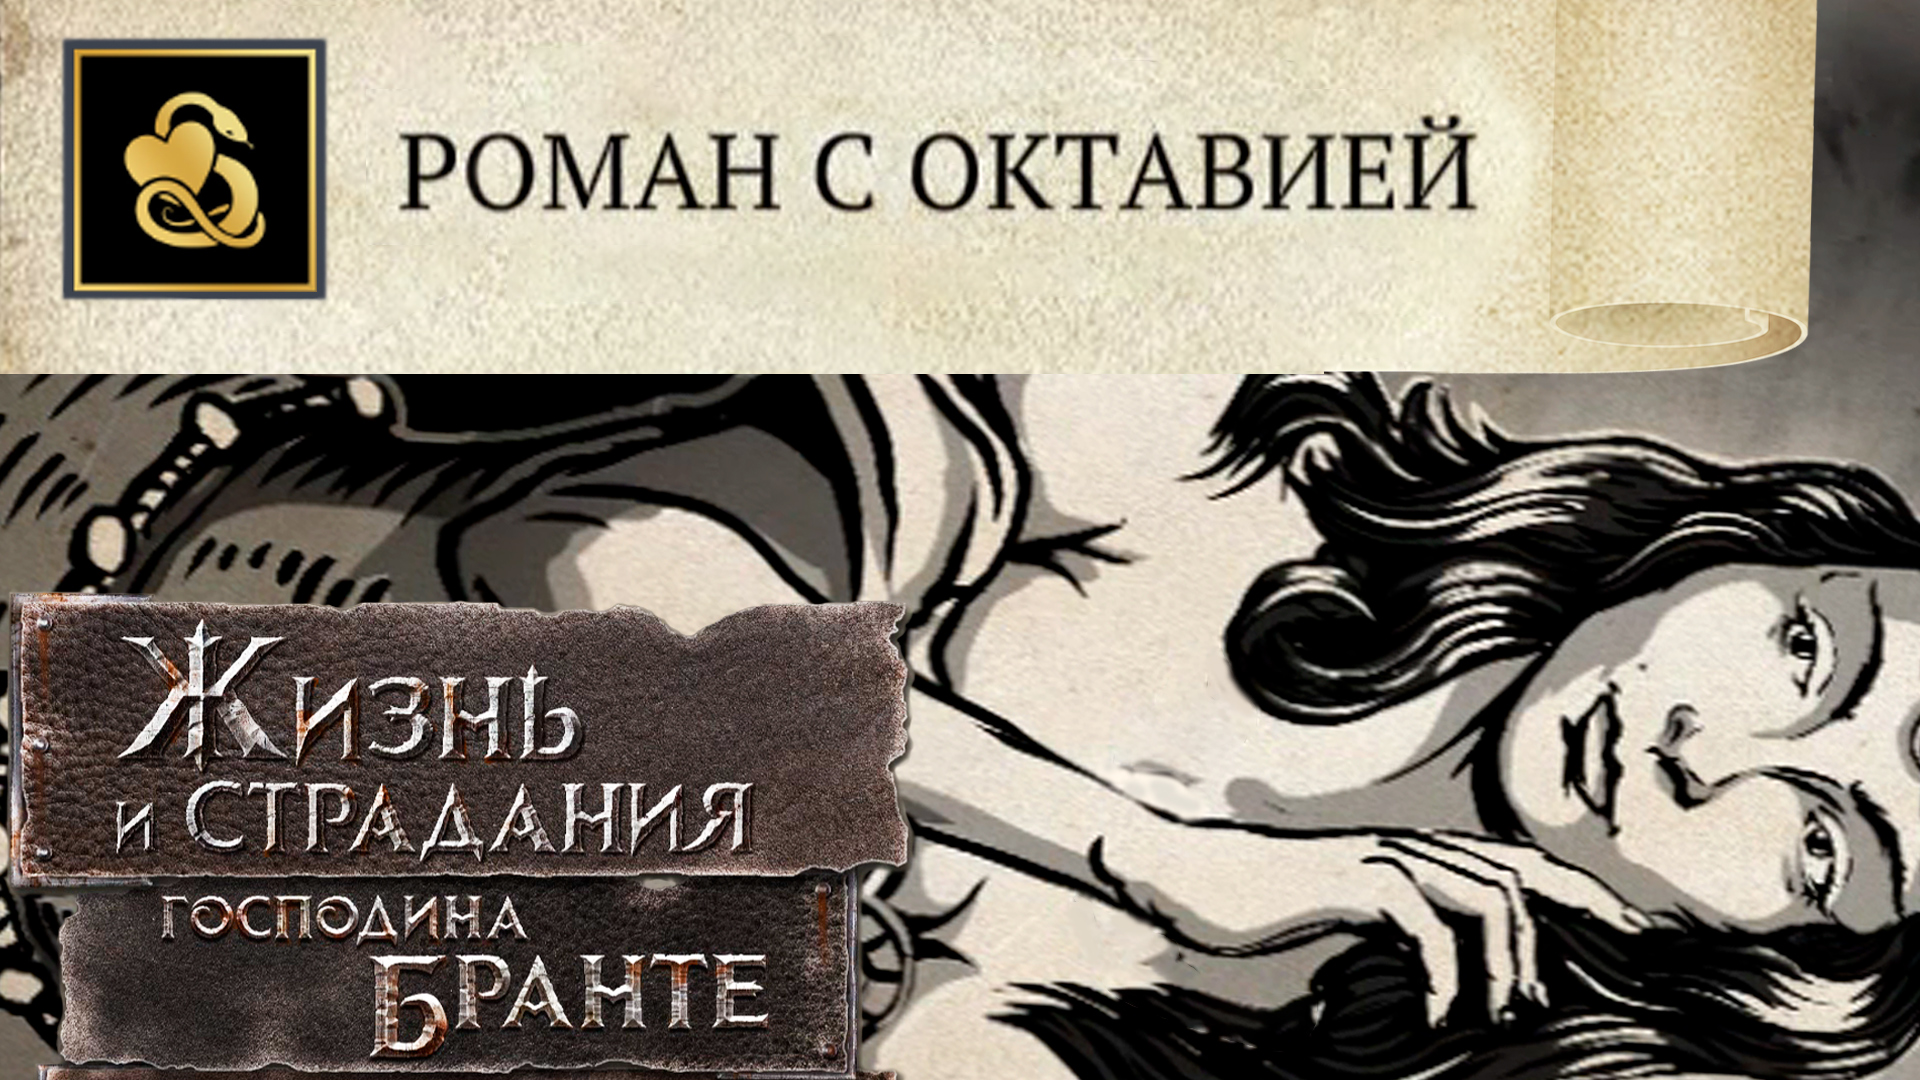 Life is suffering. The Life and suffering of Sir Brante. Жизнь и страдания господина Бронте арты.